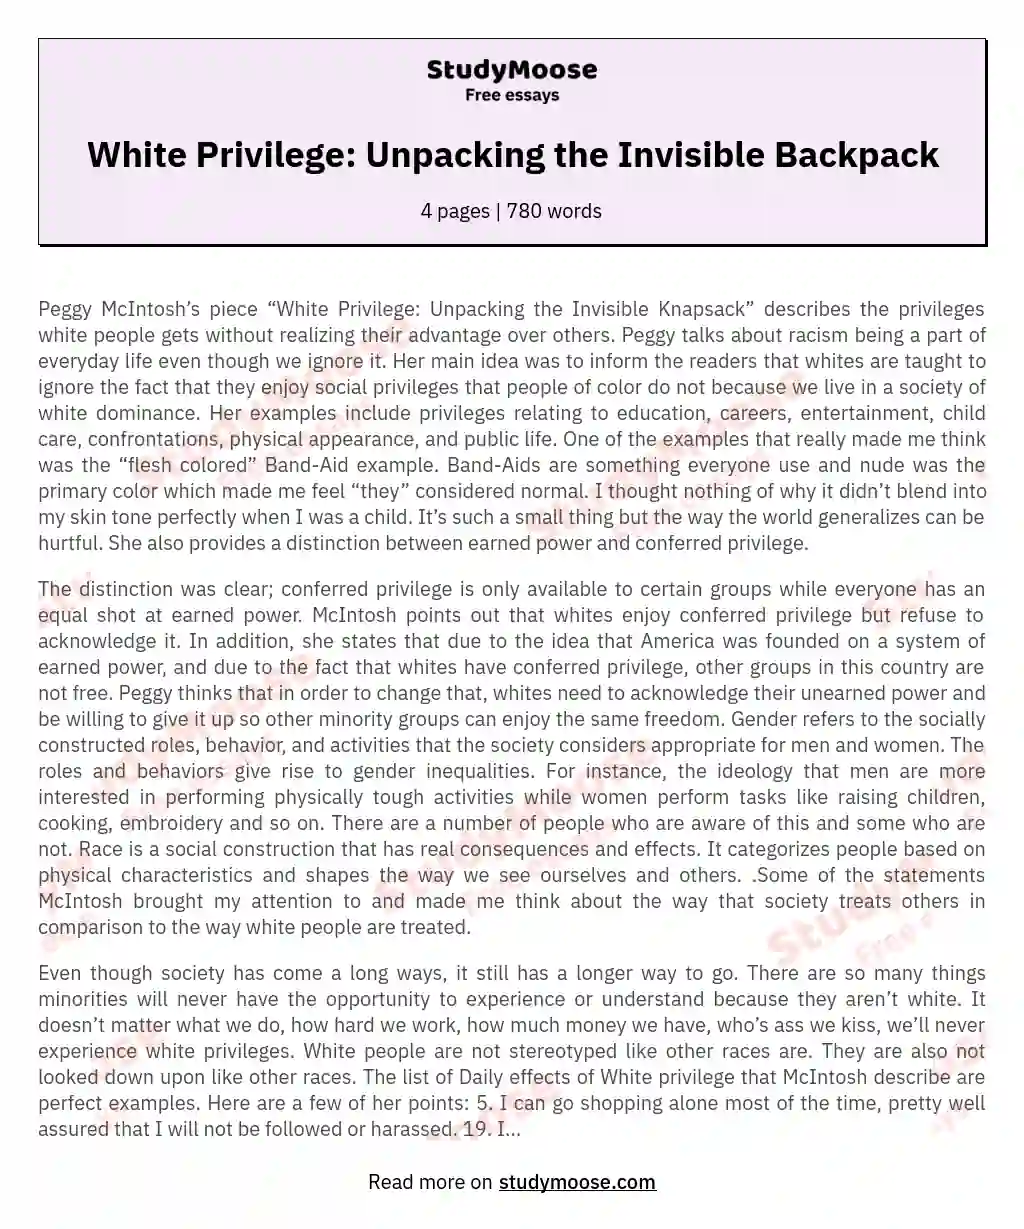 White Privilege: Unpacking the Invisible Backpack essay